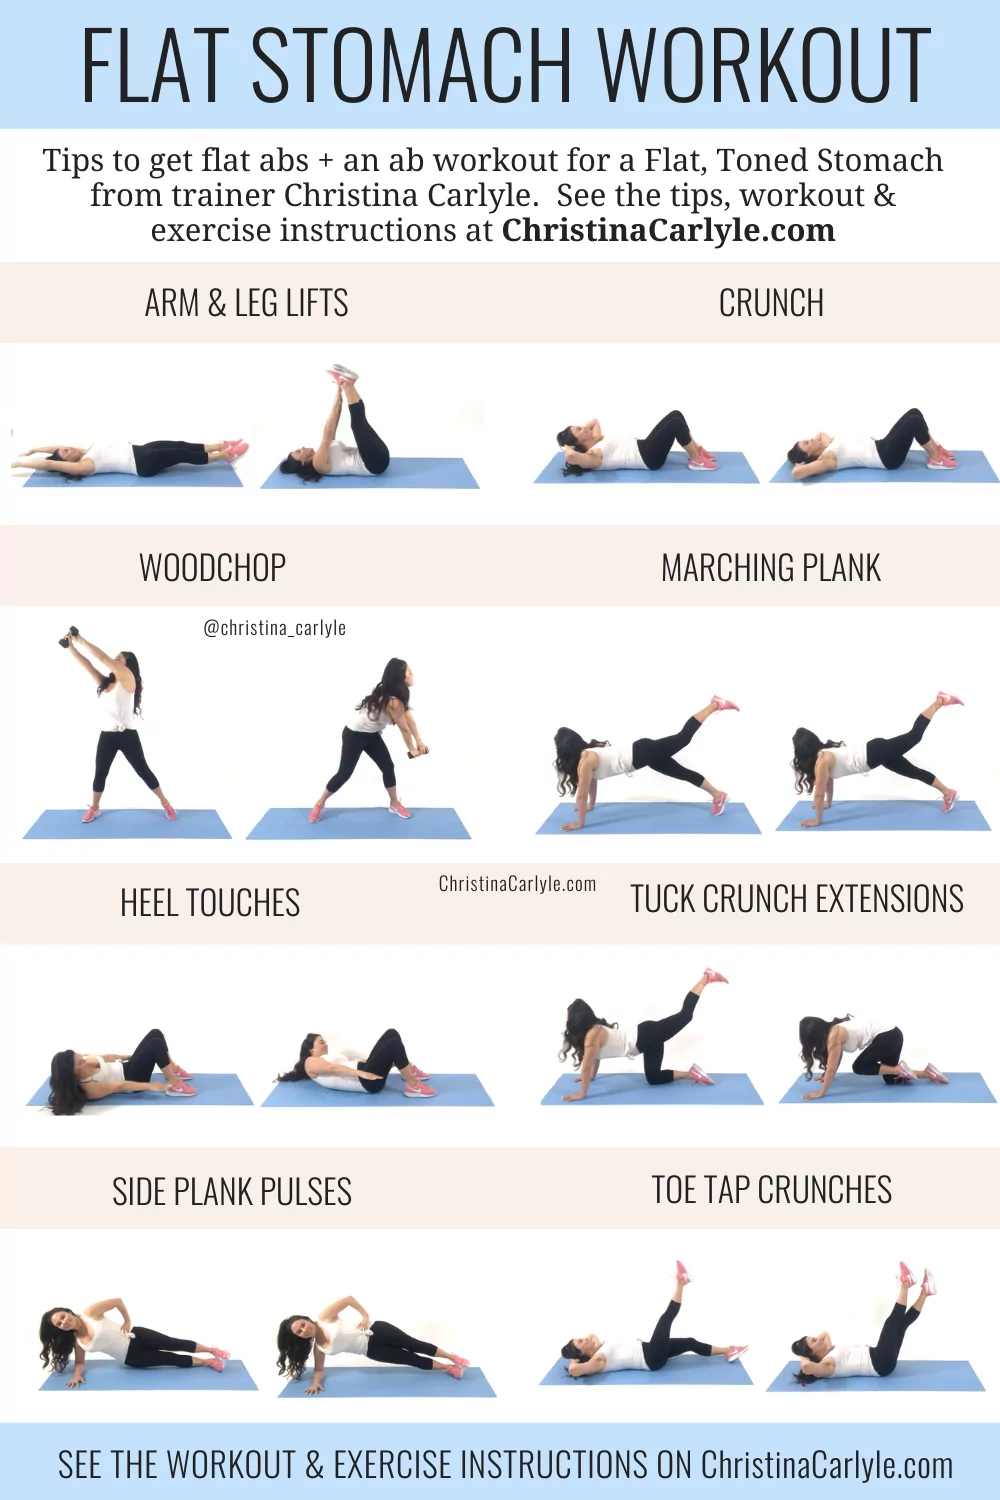 trainer Christina Carlyle doing 8 exercises for a flat stomach and text that says Flat Stomach Workout